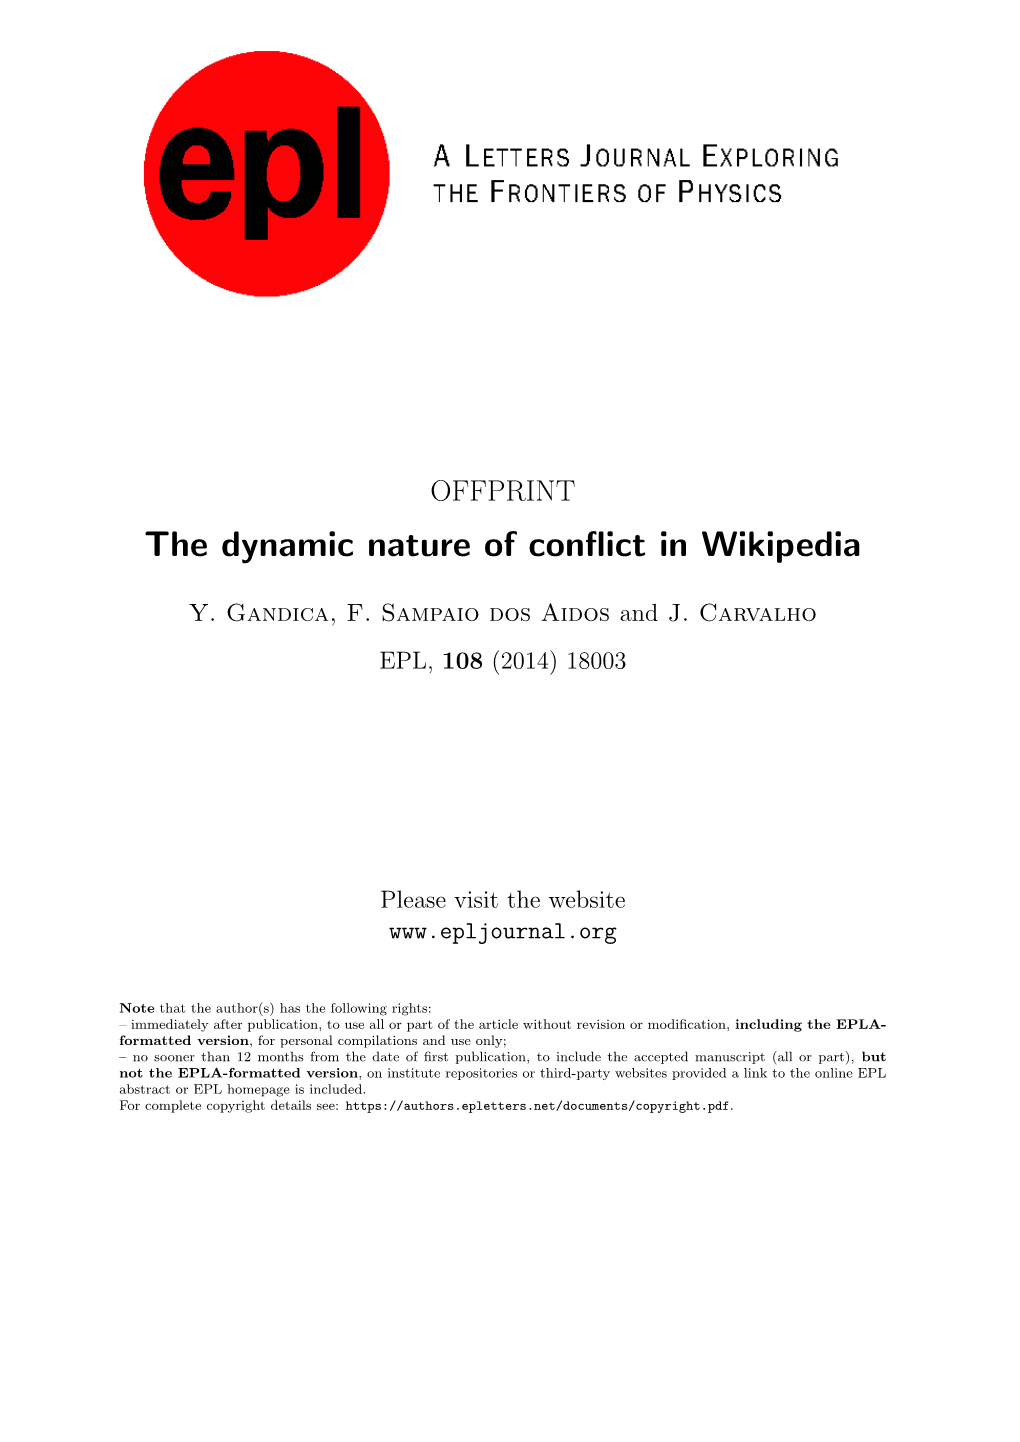 The Dynamic Nature of Conflict in Wikipedia